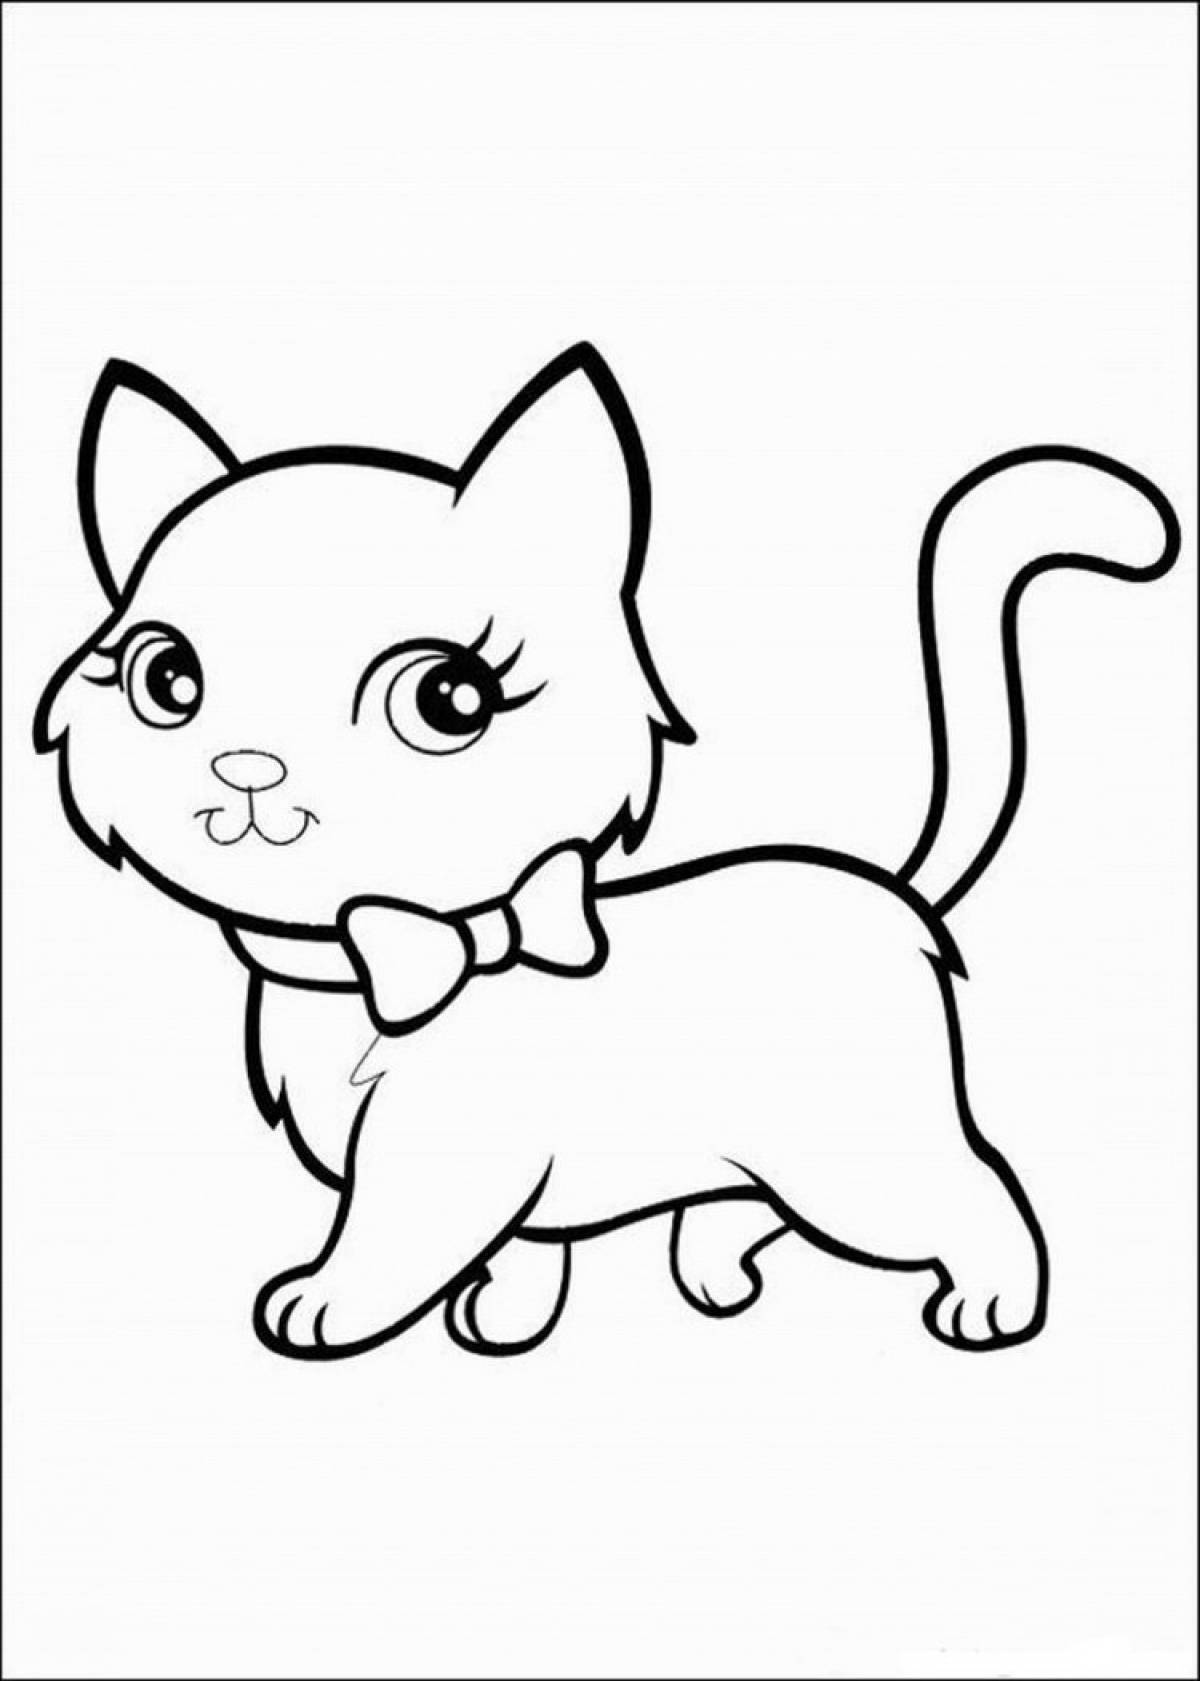 Coloring page cozy little kitty